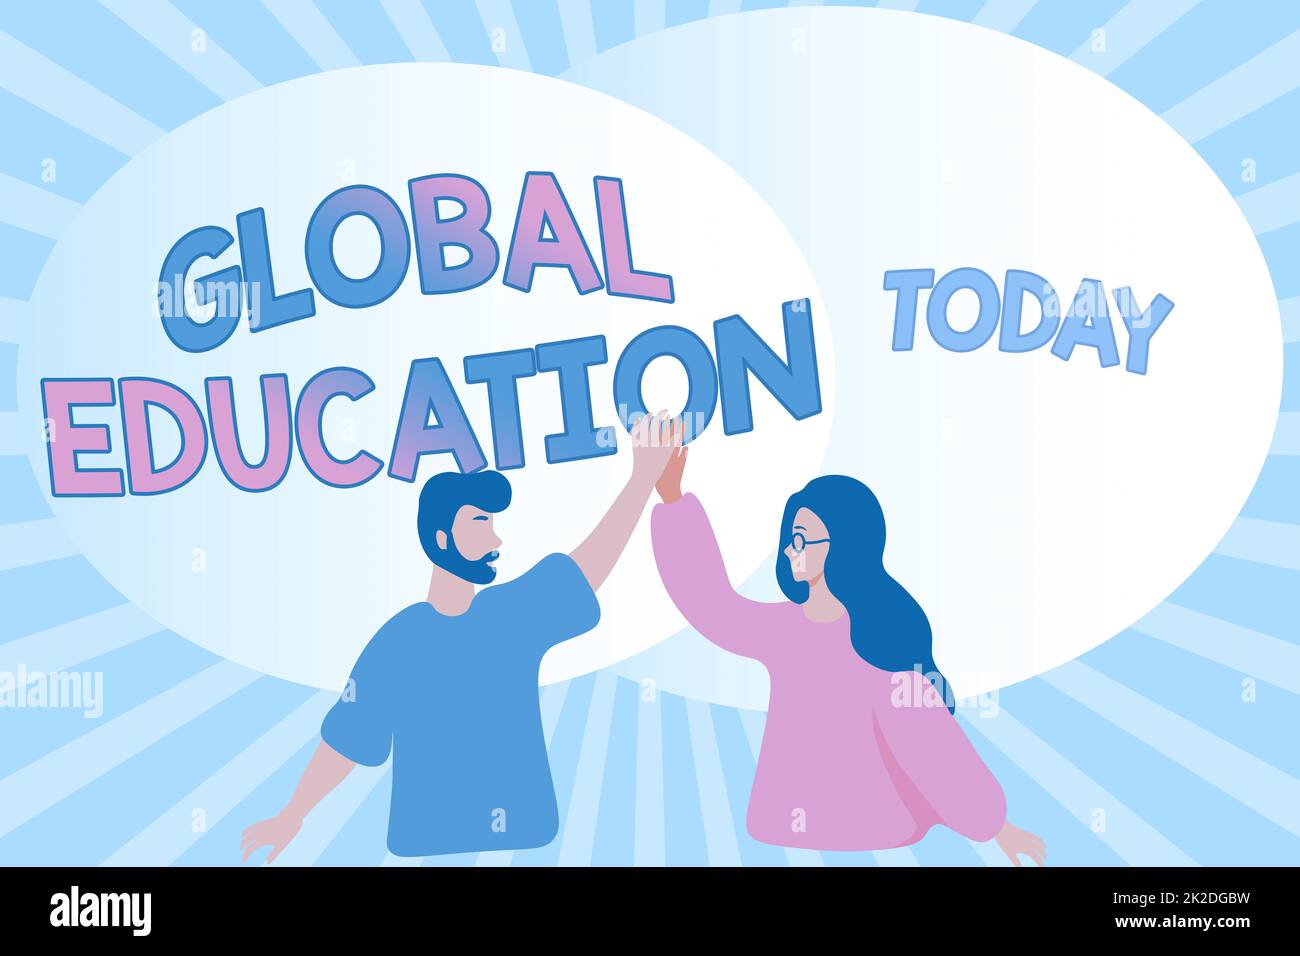 Conceptual caption Global Education. Concept meaning ideas taught to enhance one s is perception of the world Happy Colleagues Illustration Giving High Fives To Each Other. Stock Photo